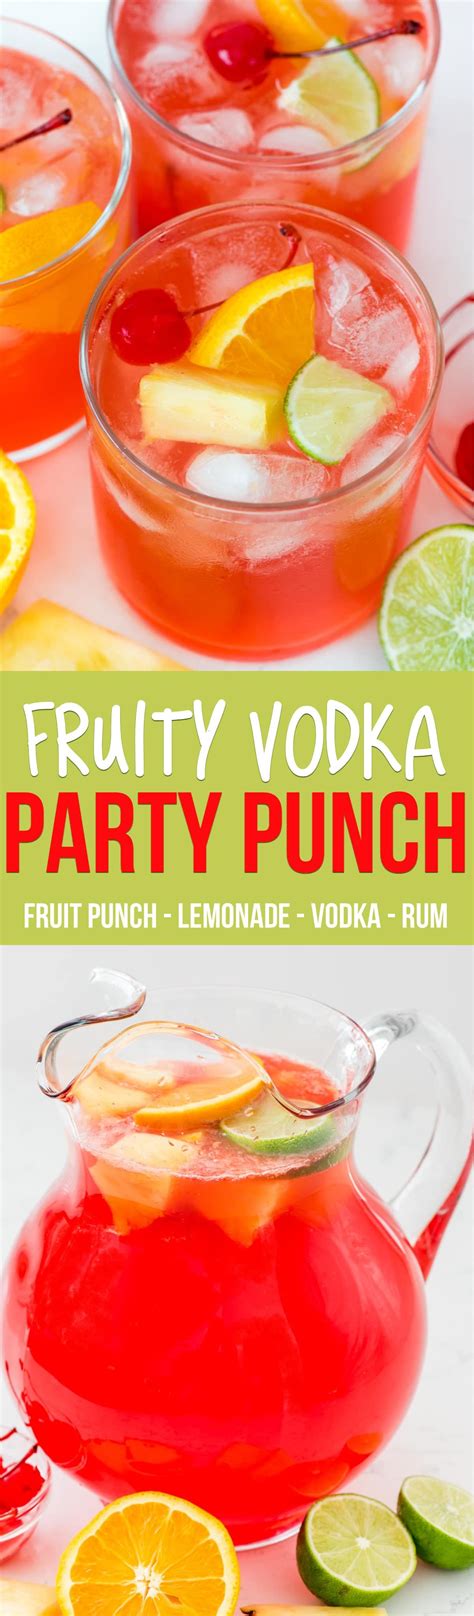 Fruity Vodka Party Punch Recipe Drinks Alcohol Recipes Easy Drinks